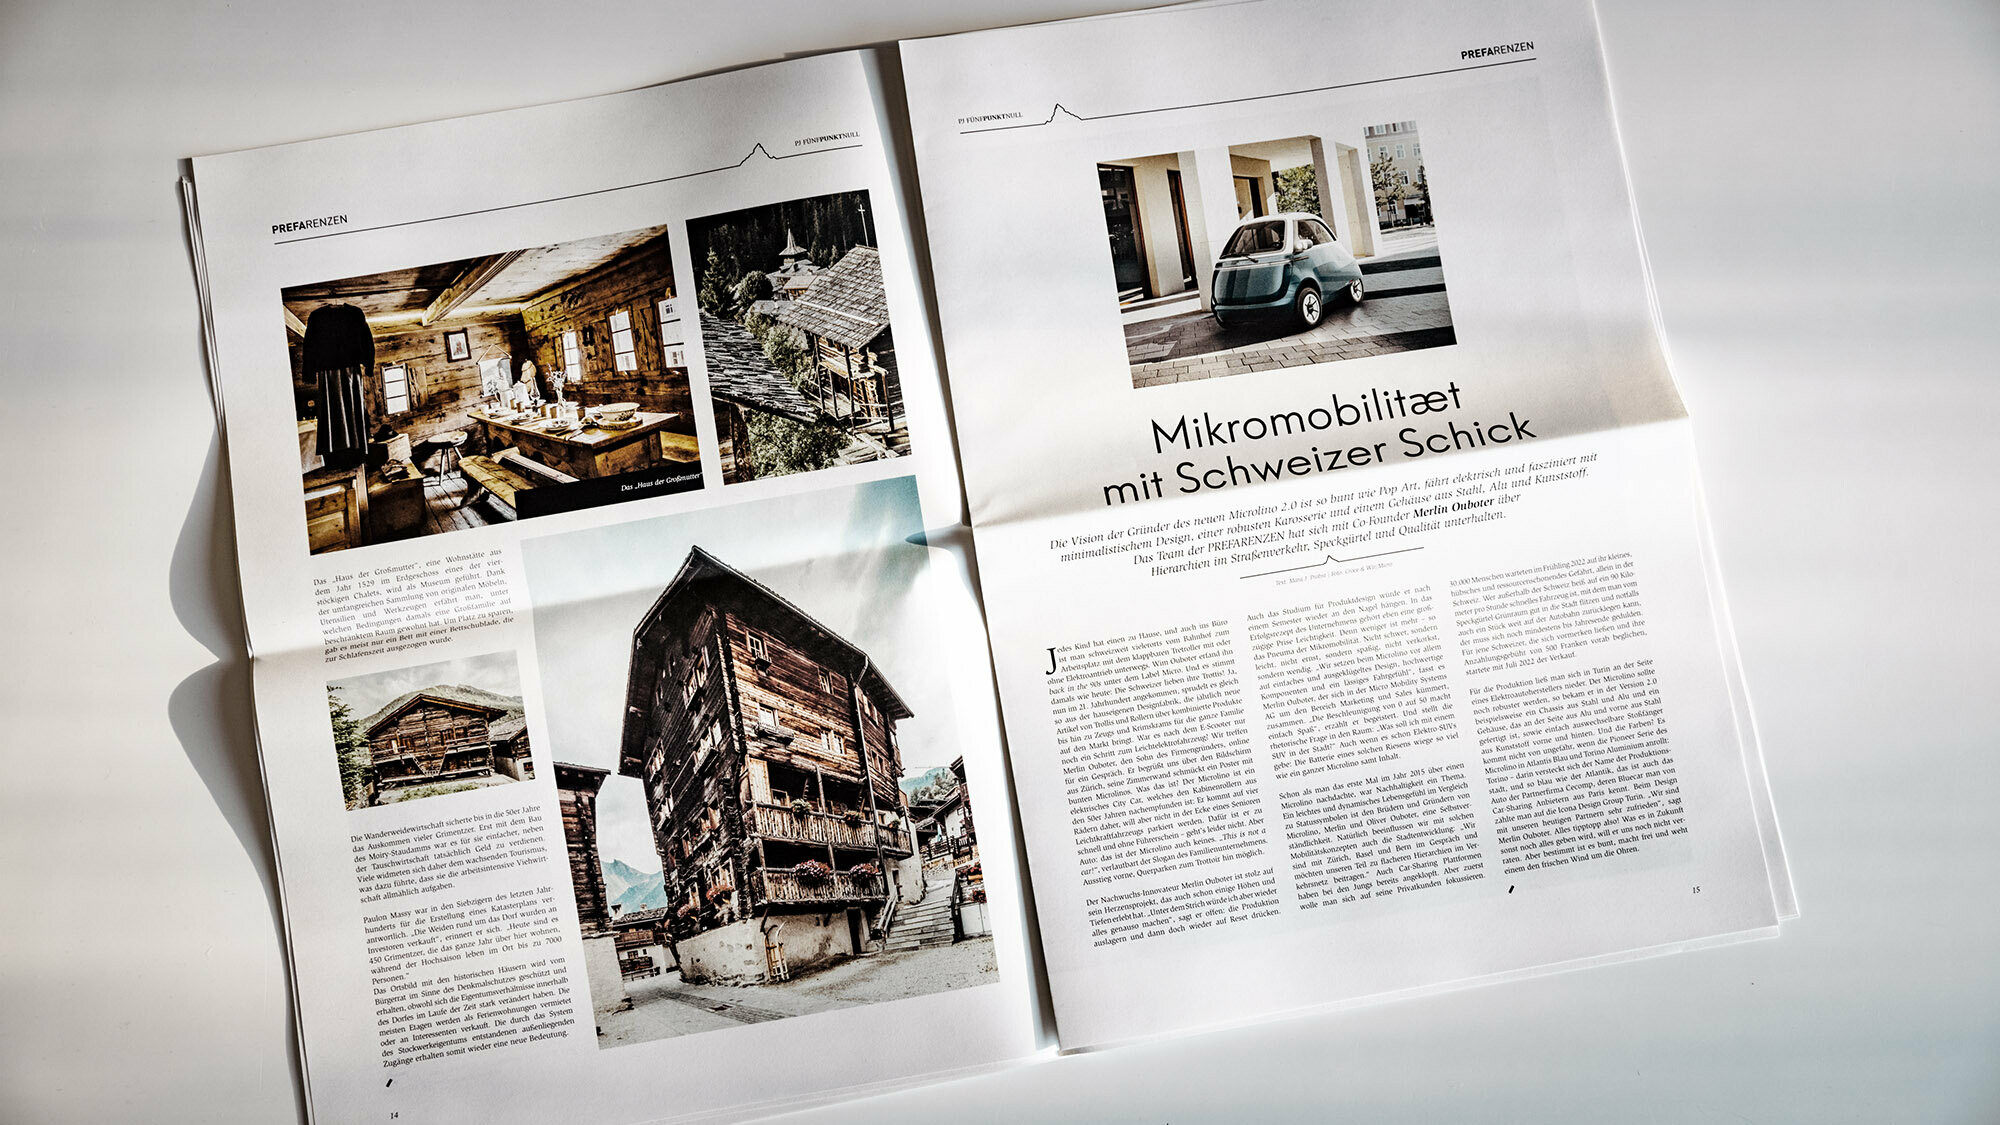 Frontal view of a tilted double page with text and architecture photos.